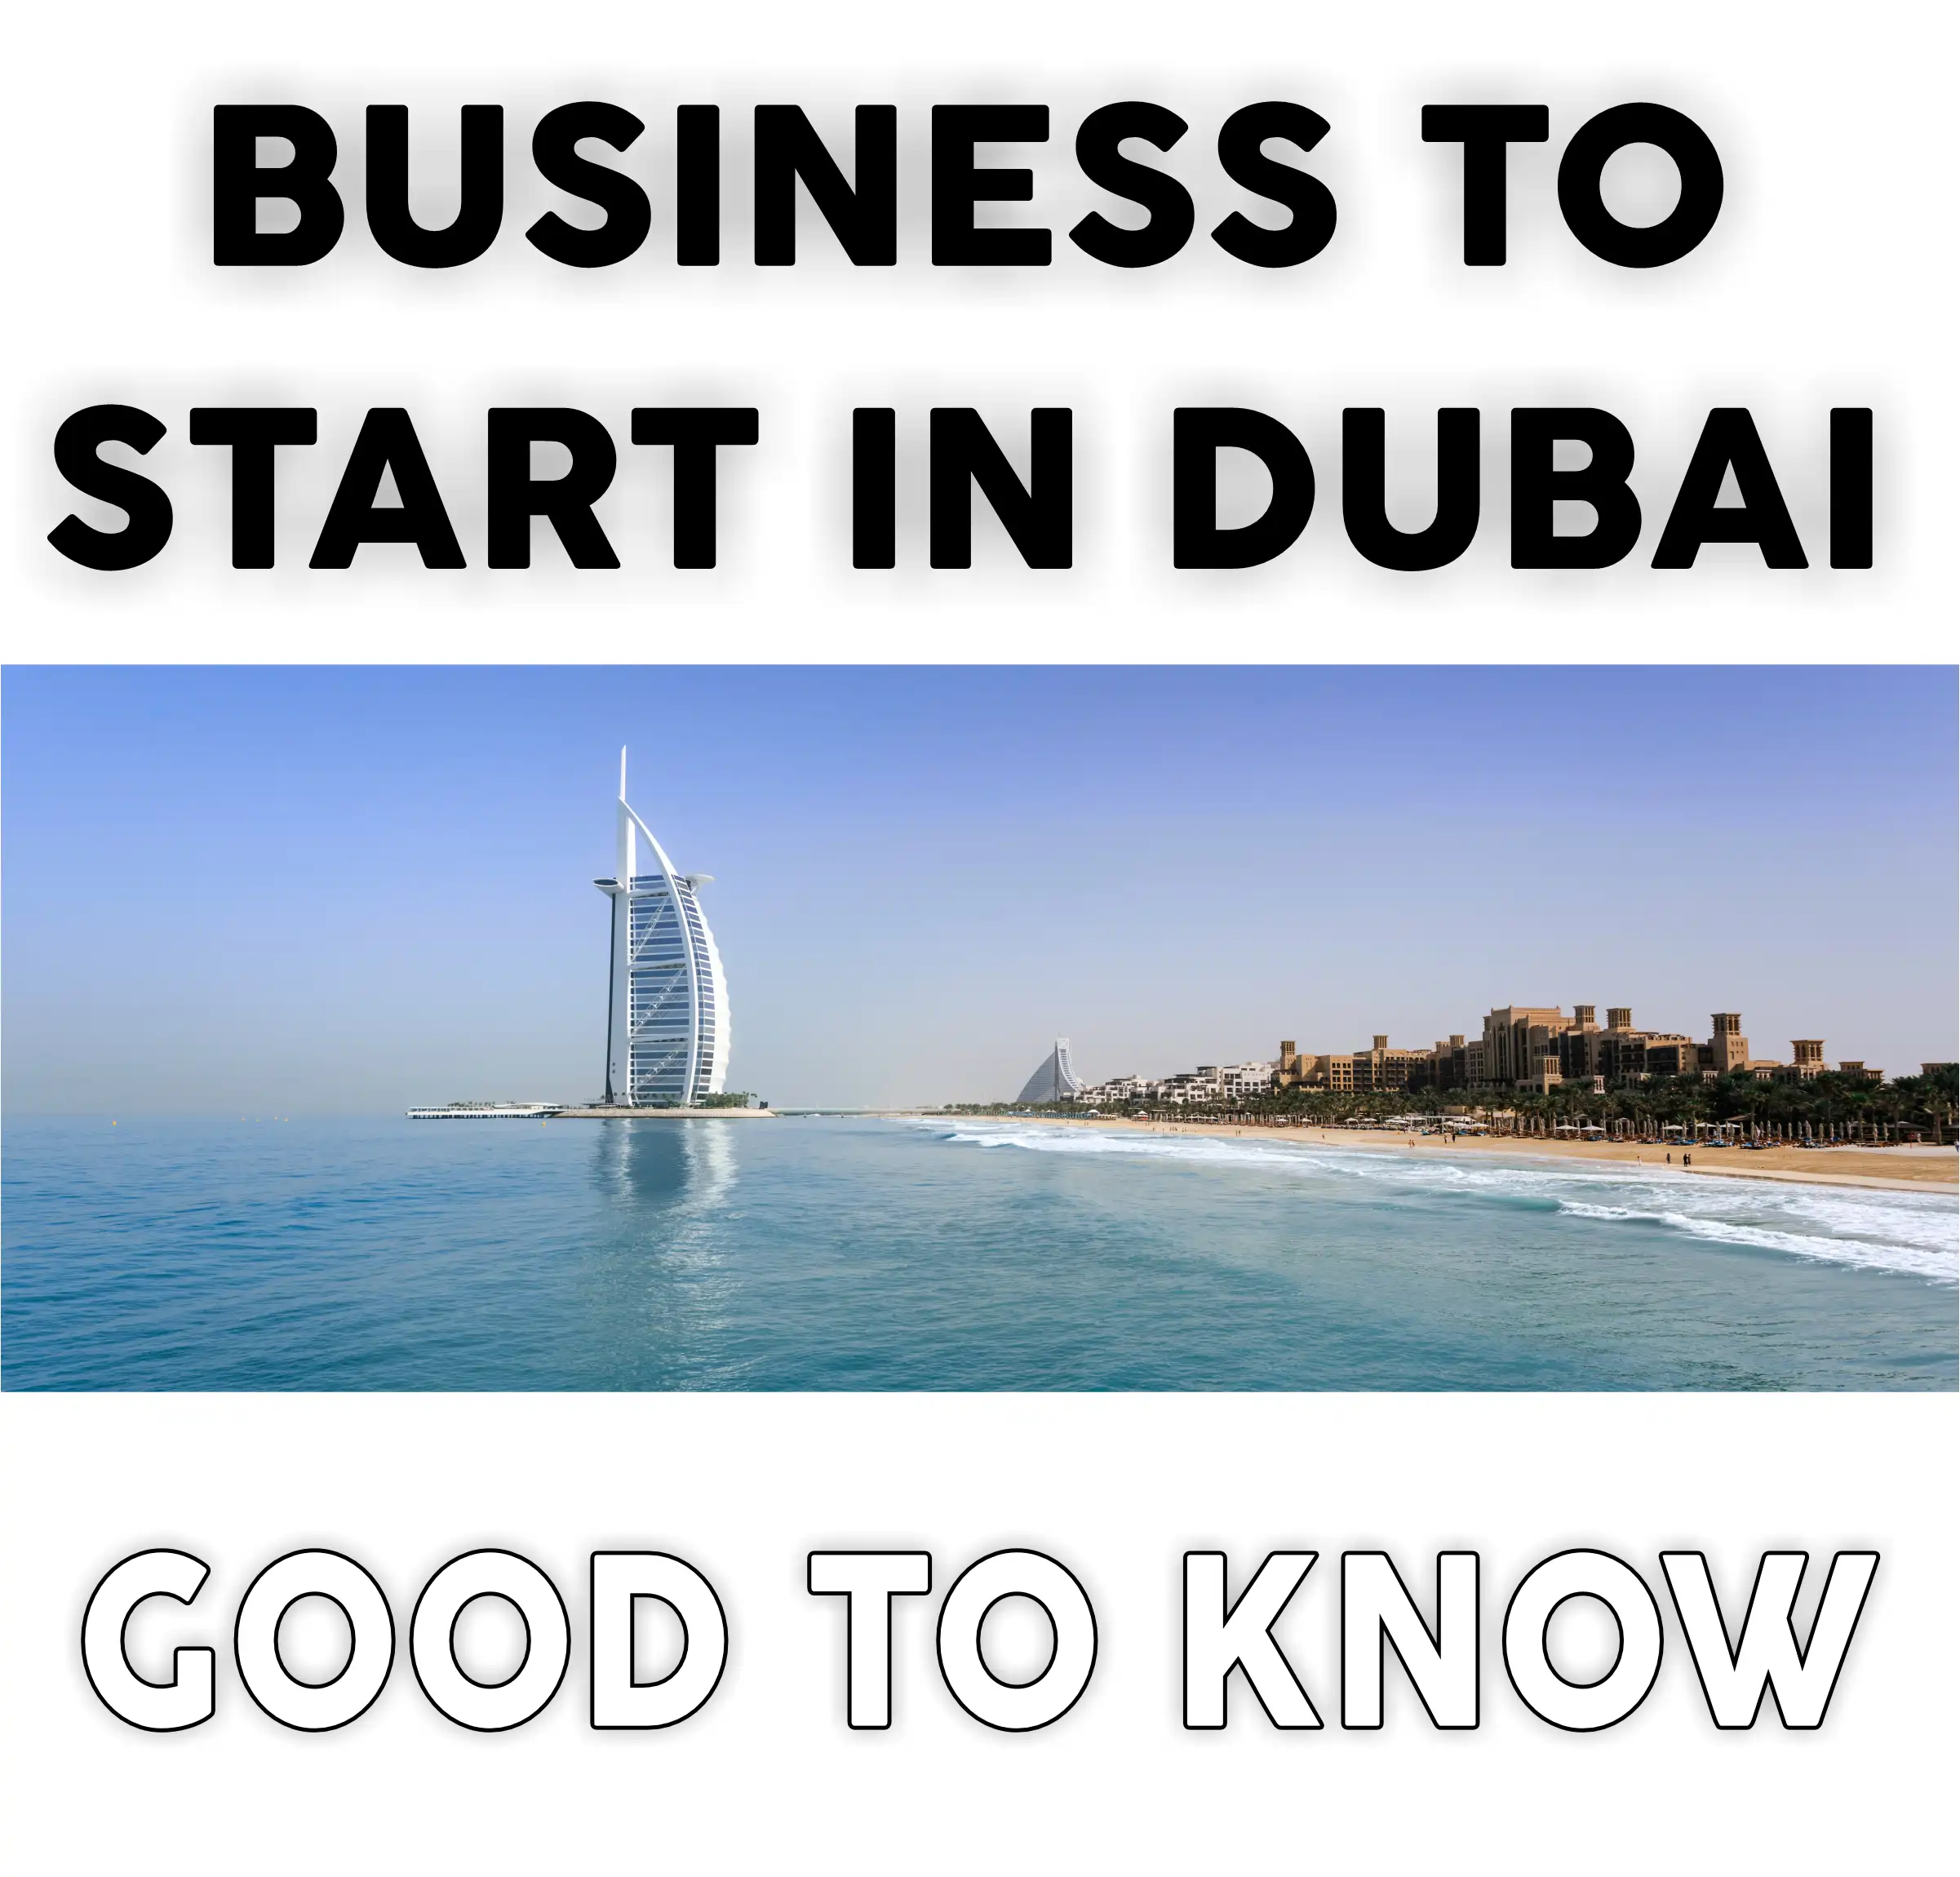 business to start in dubai good to know